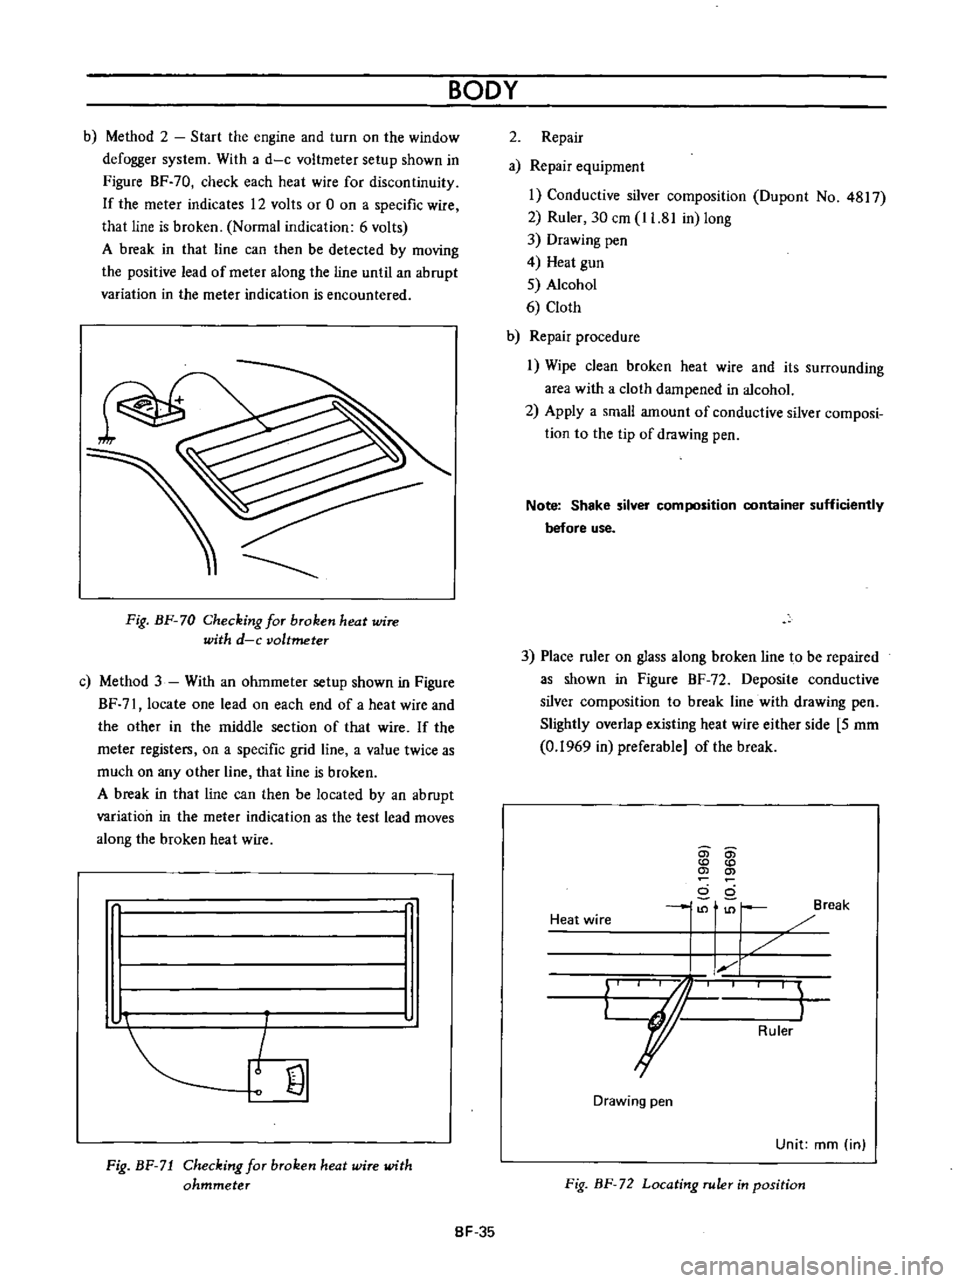 DATSUN B110 1973  Service Owners Guide 
BODY

b

Method 
2

Start 
the

engine 
and 
turn 
on 
the 
window

defogger 
system 
With 
a 
d 
c

voltmeter

setup 
shown 
in

Figure 
BF

70 
check 
each 
heat 
wire

for

discontinuity

If

the 